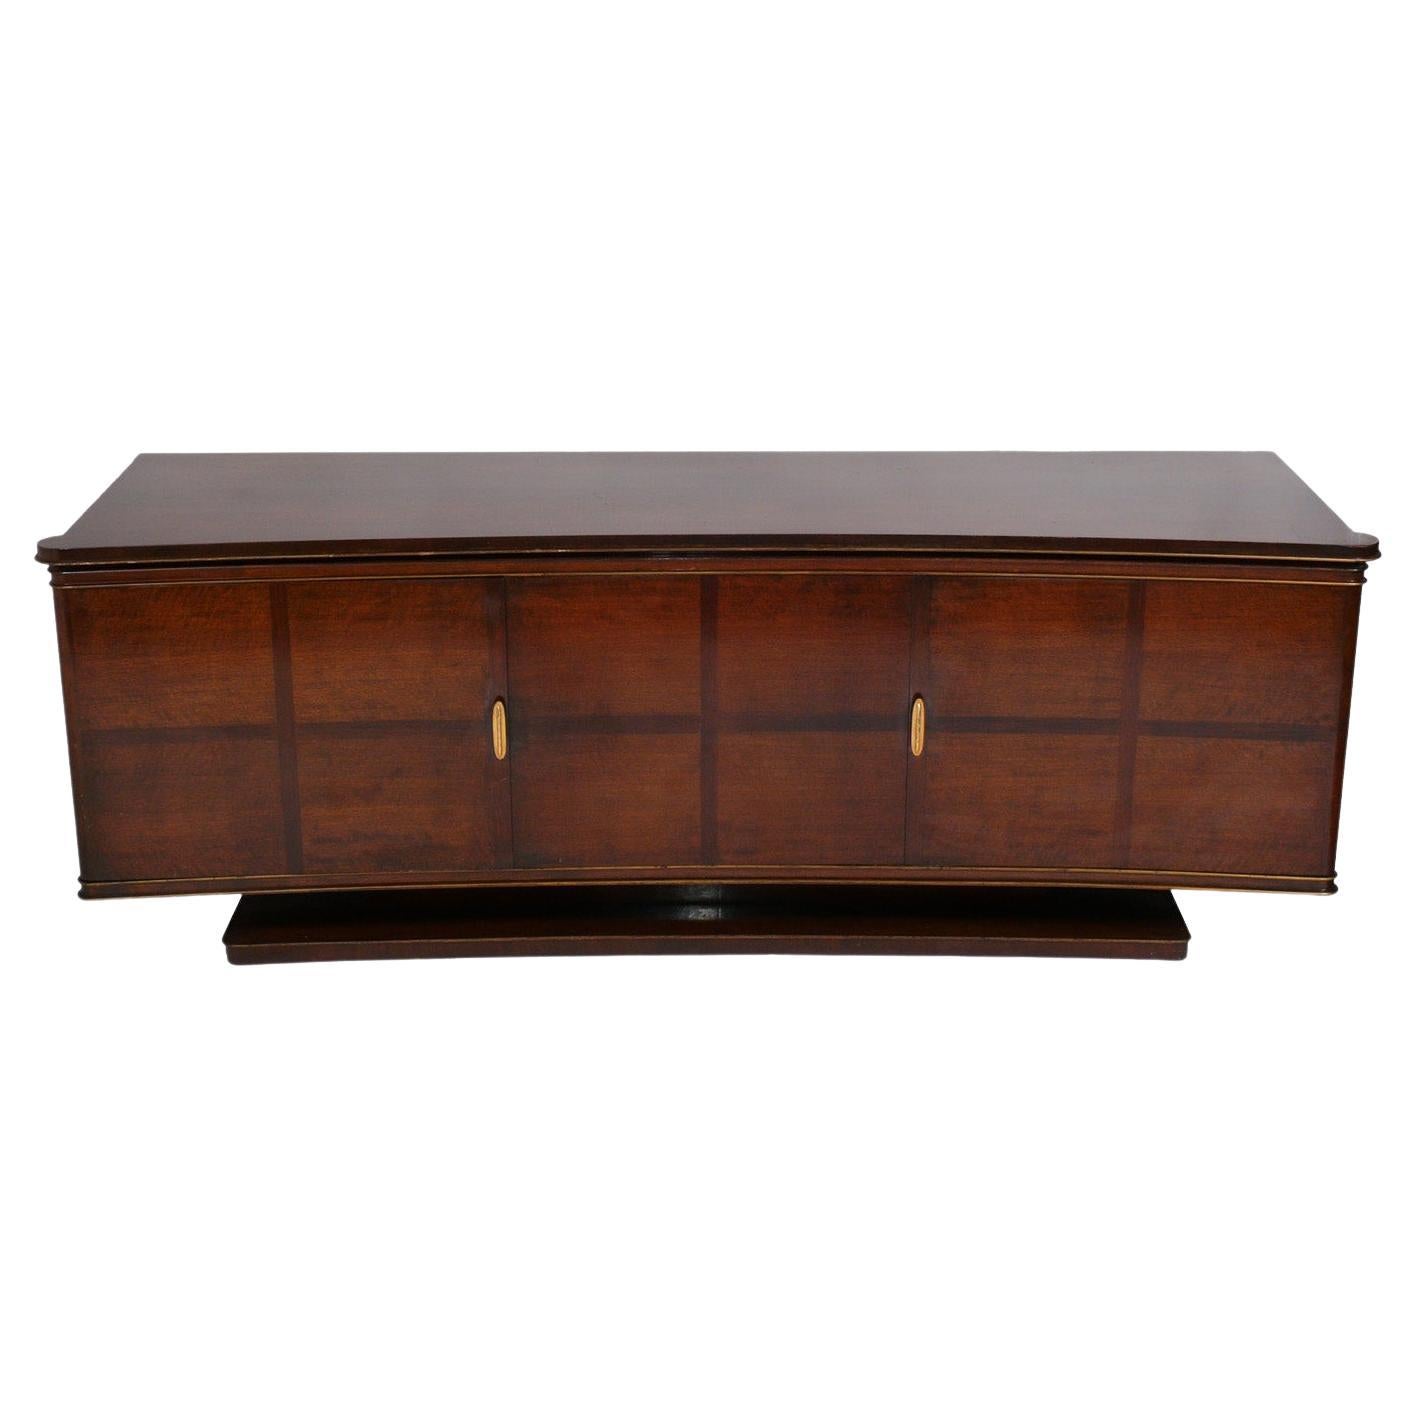 French Art Deco Credenza or Server For Sale